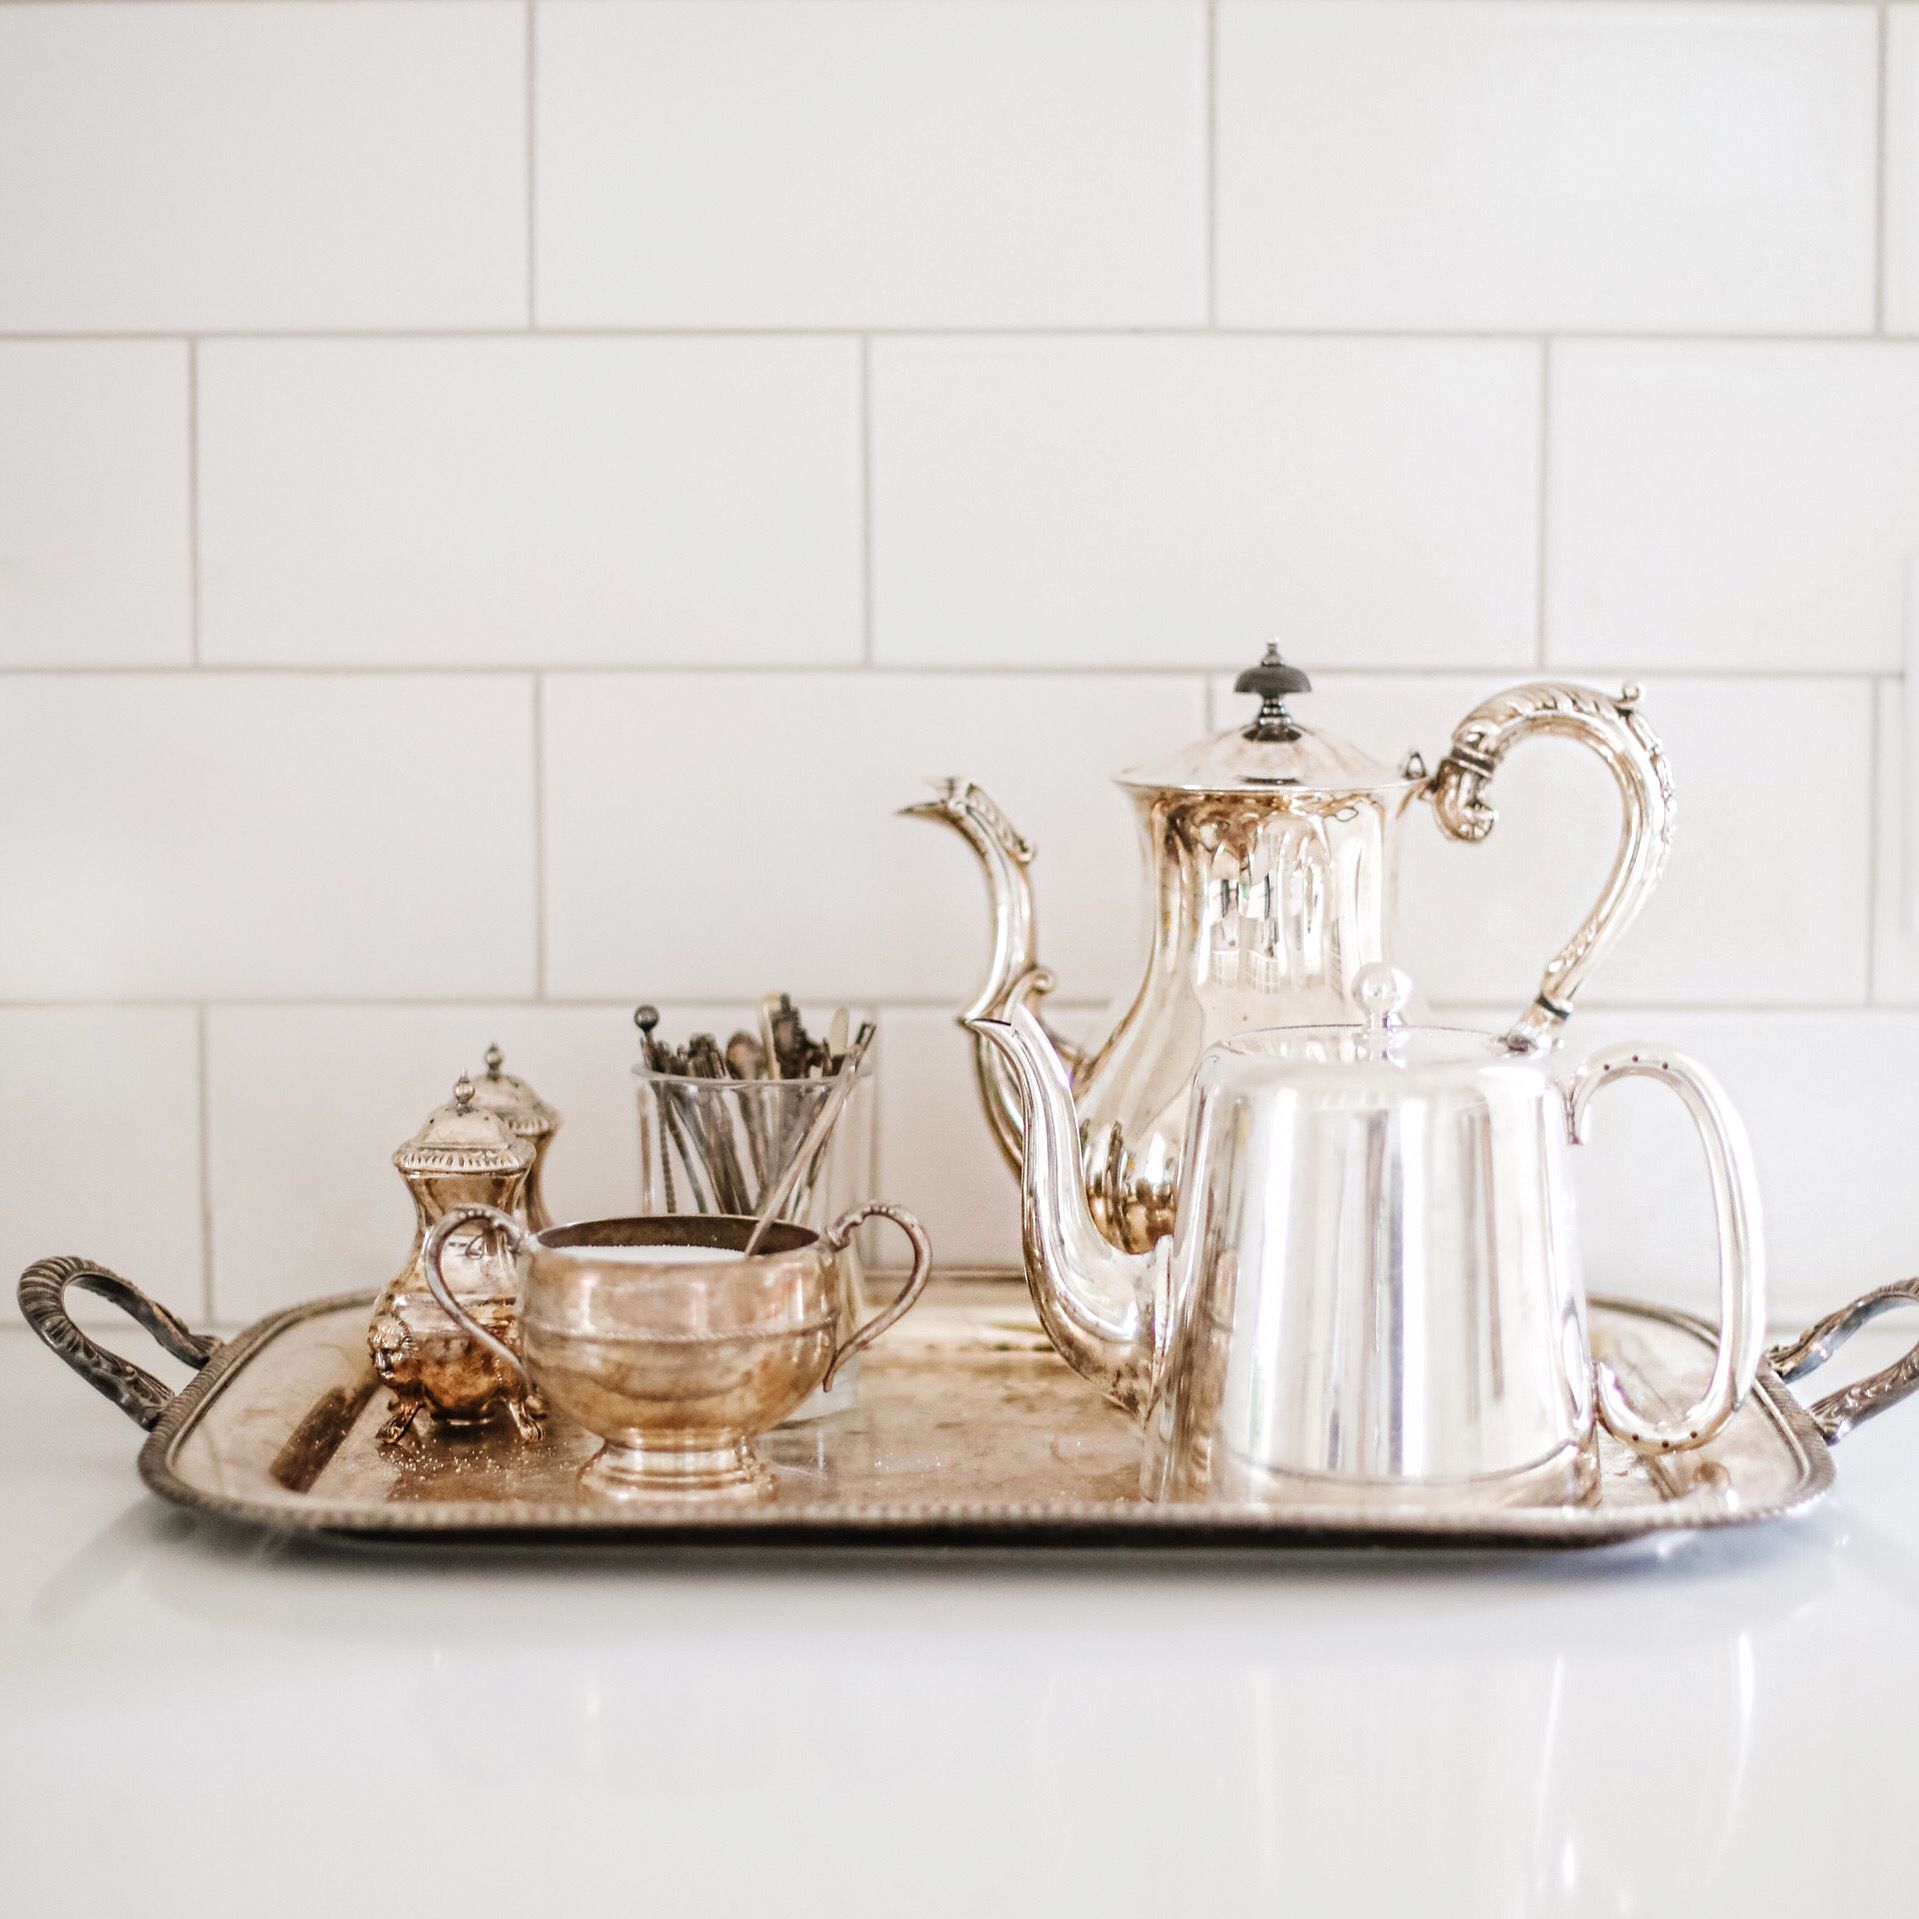 Vintage tea set: Tips for a sustainable kitchen from food blogger Tori Wesszer of Fraiche Living